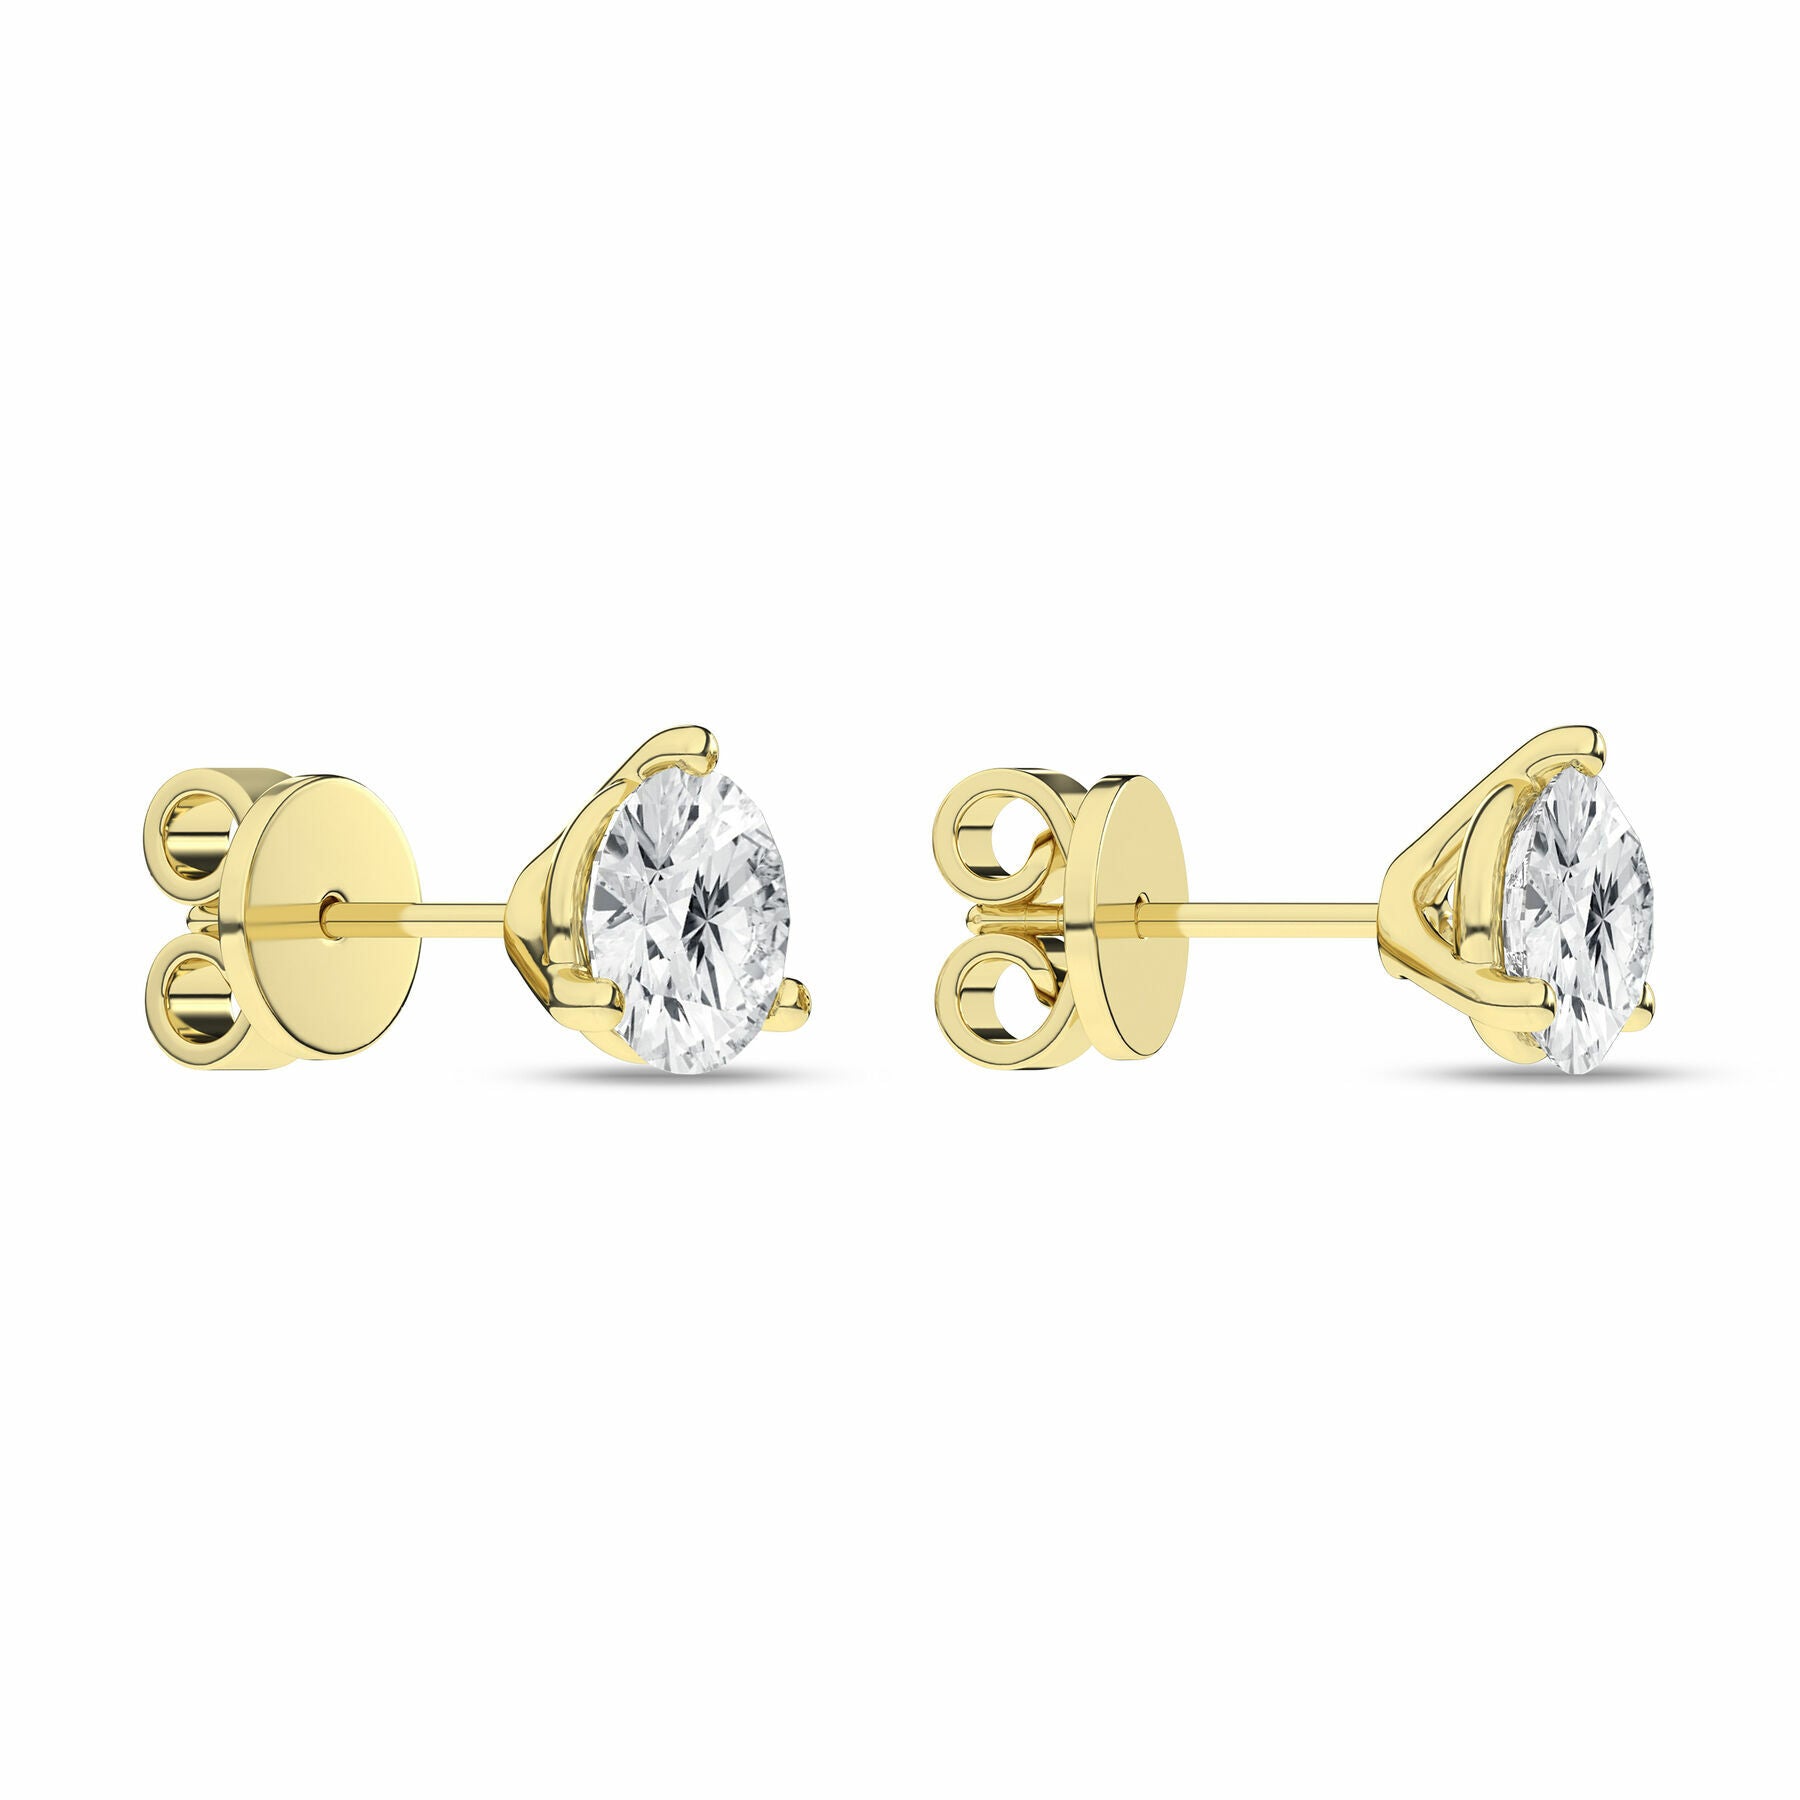 2 Carat Round Lab Grown Diamond 14K Gold 3 Prong Martini Solitaire Stud Earrings